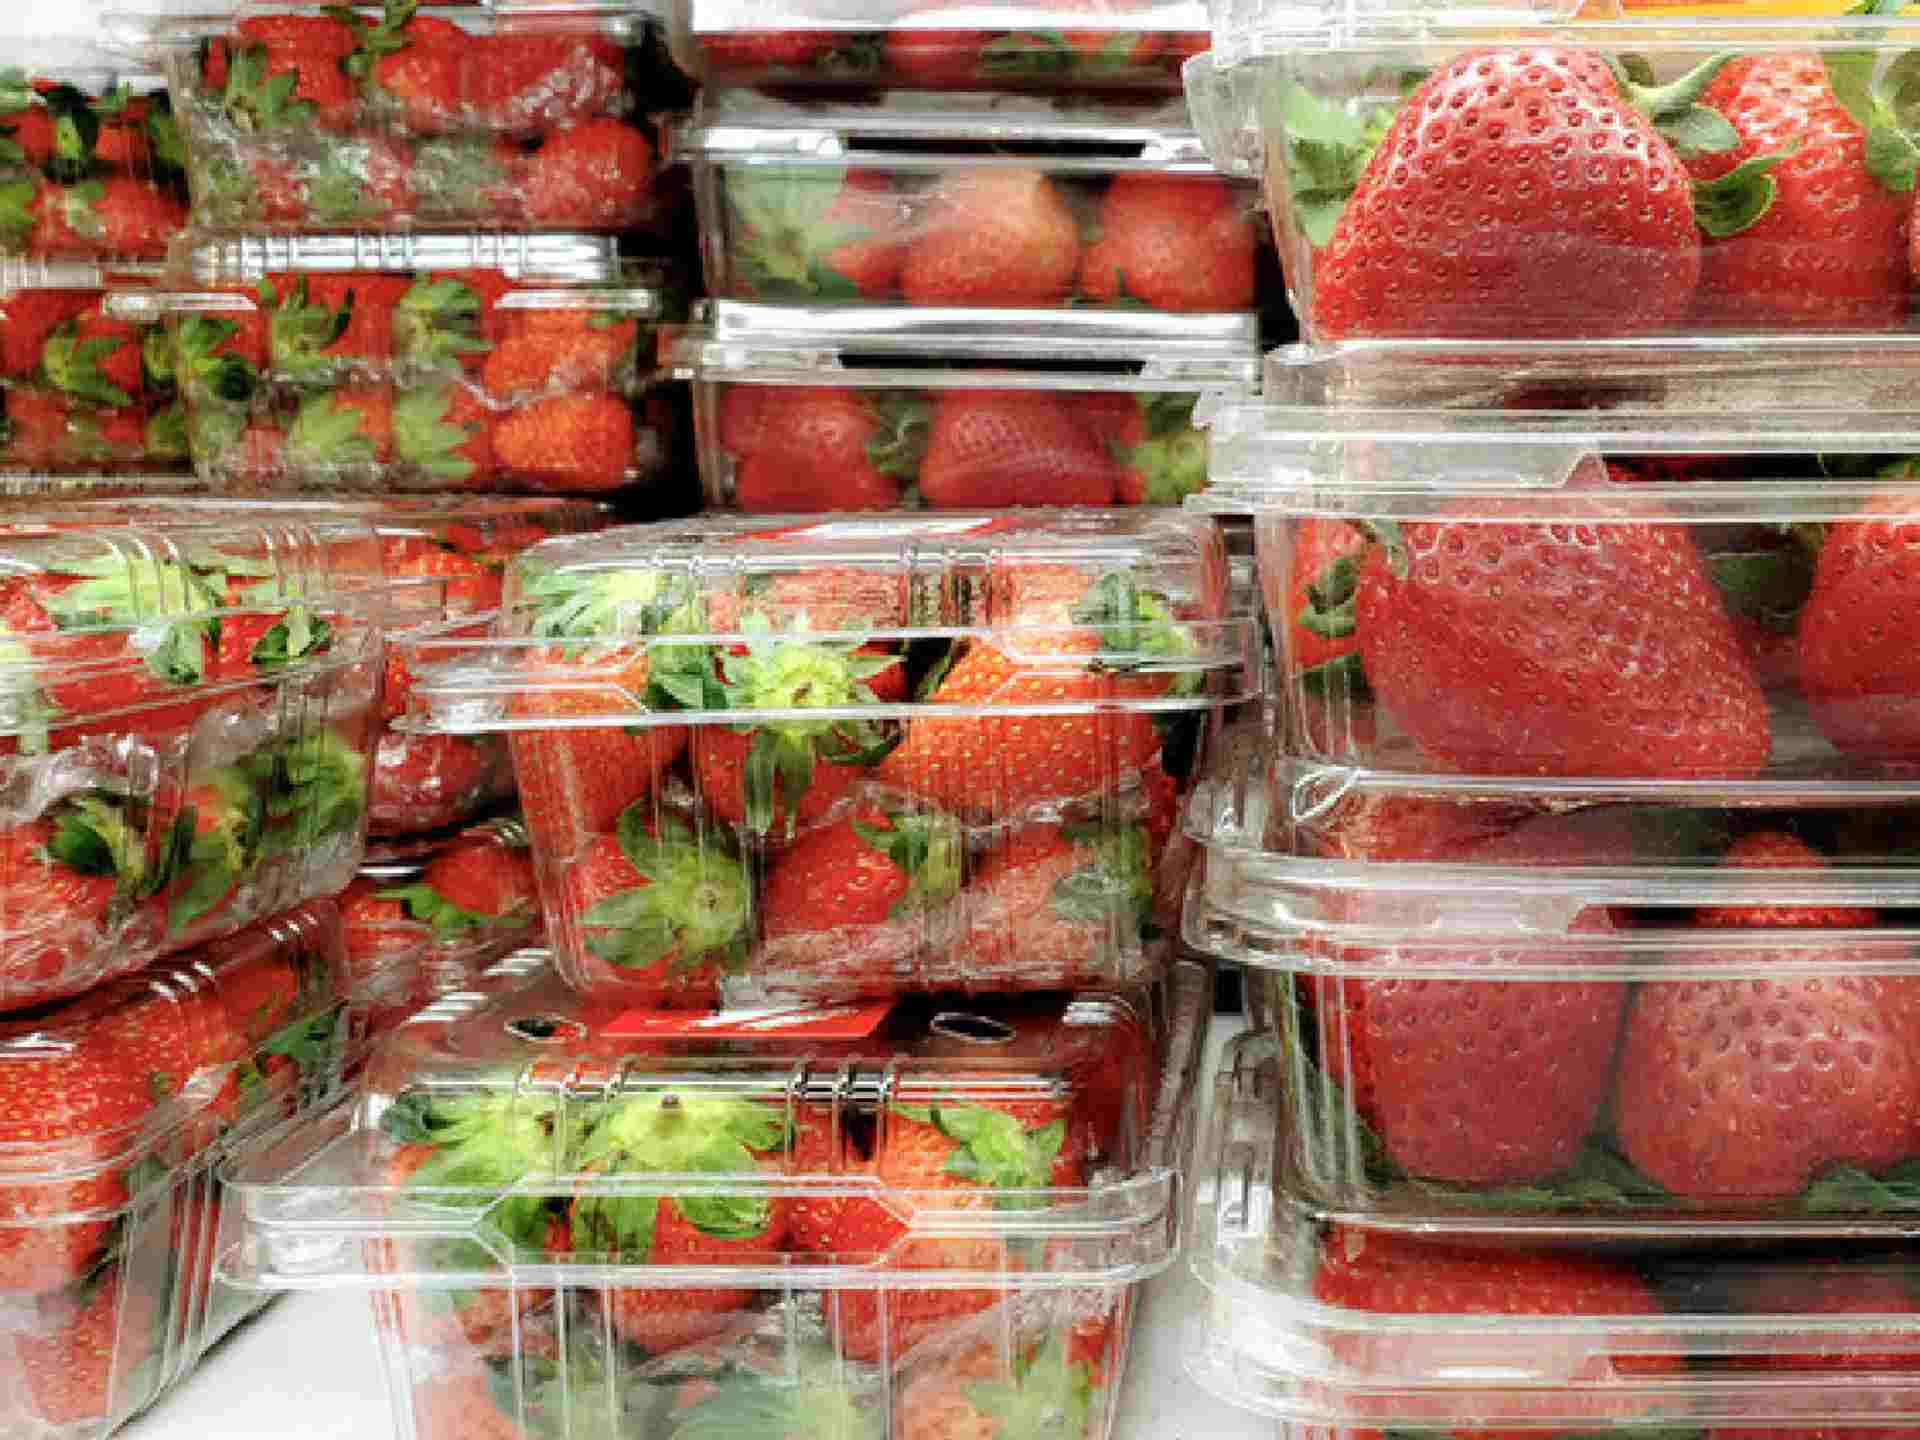 How To Store Strawberries [A Complete Guide]